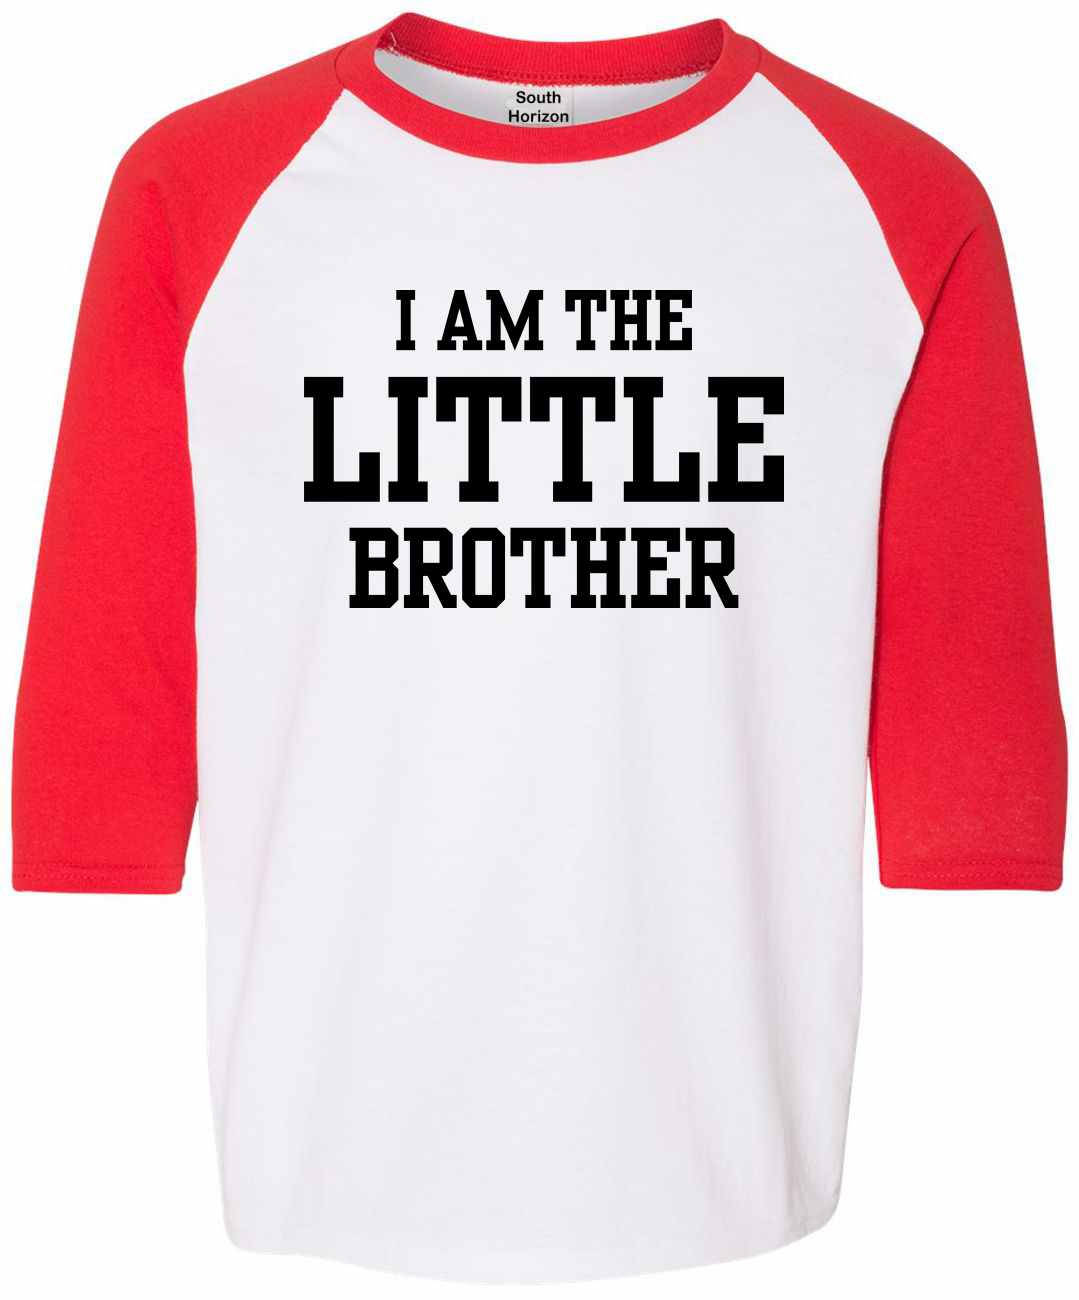 I AM The Little Brother on Youth Baseball Shirt